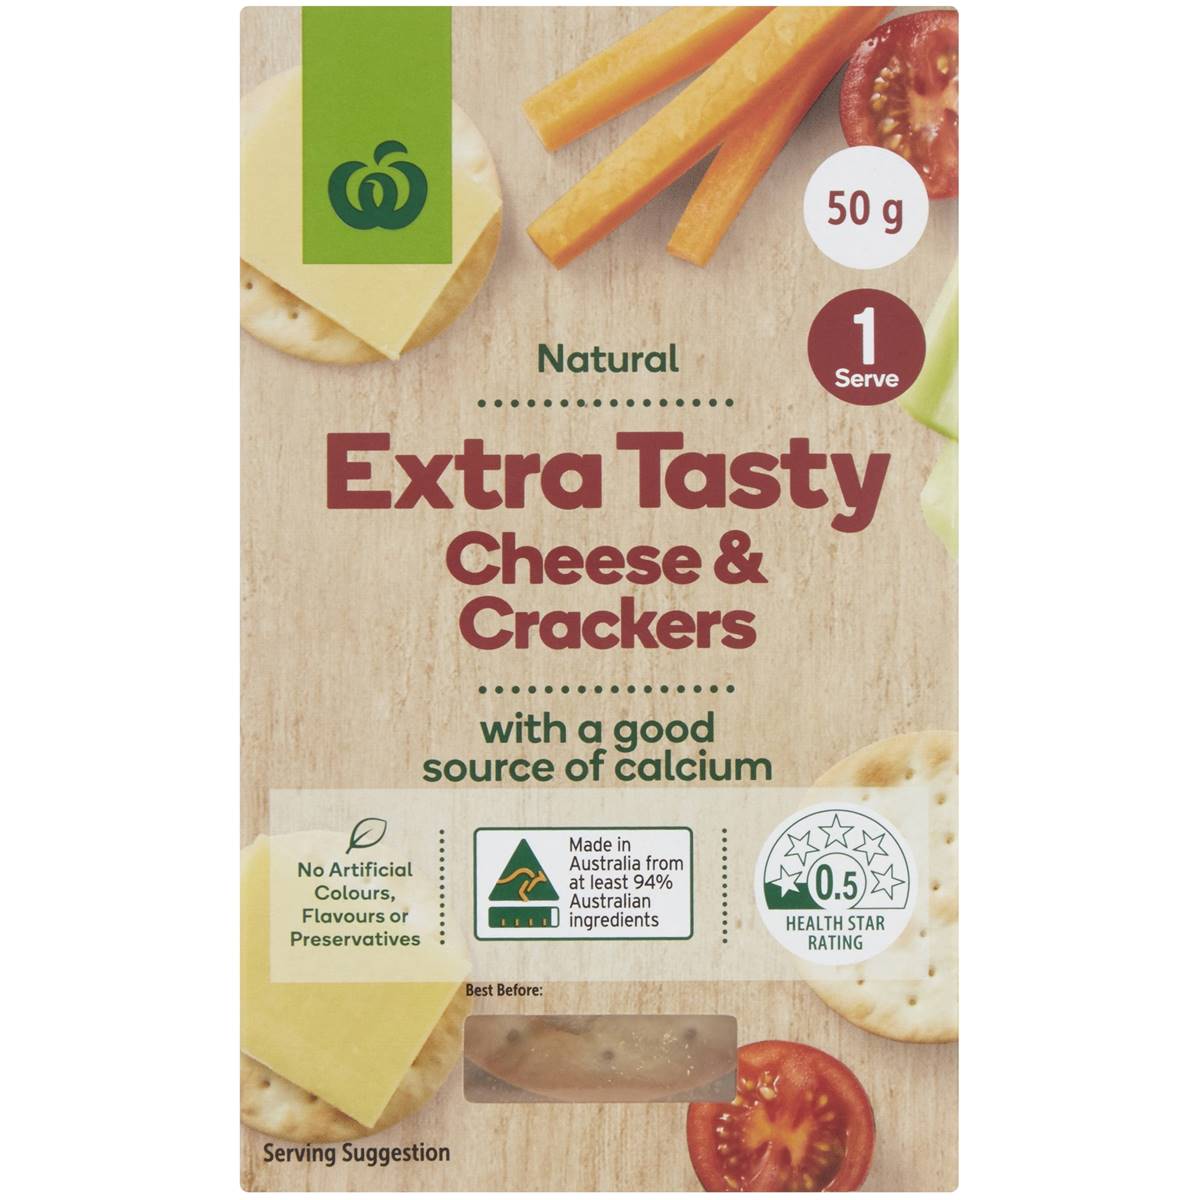 Calories in Woolworths Cheese & Crackers Extra Tasty